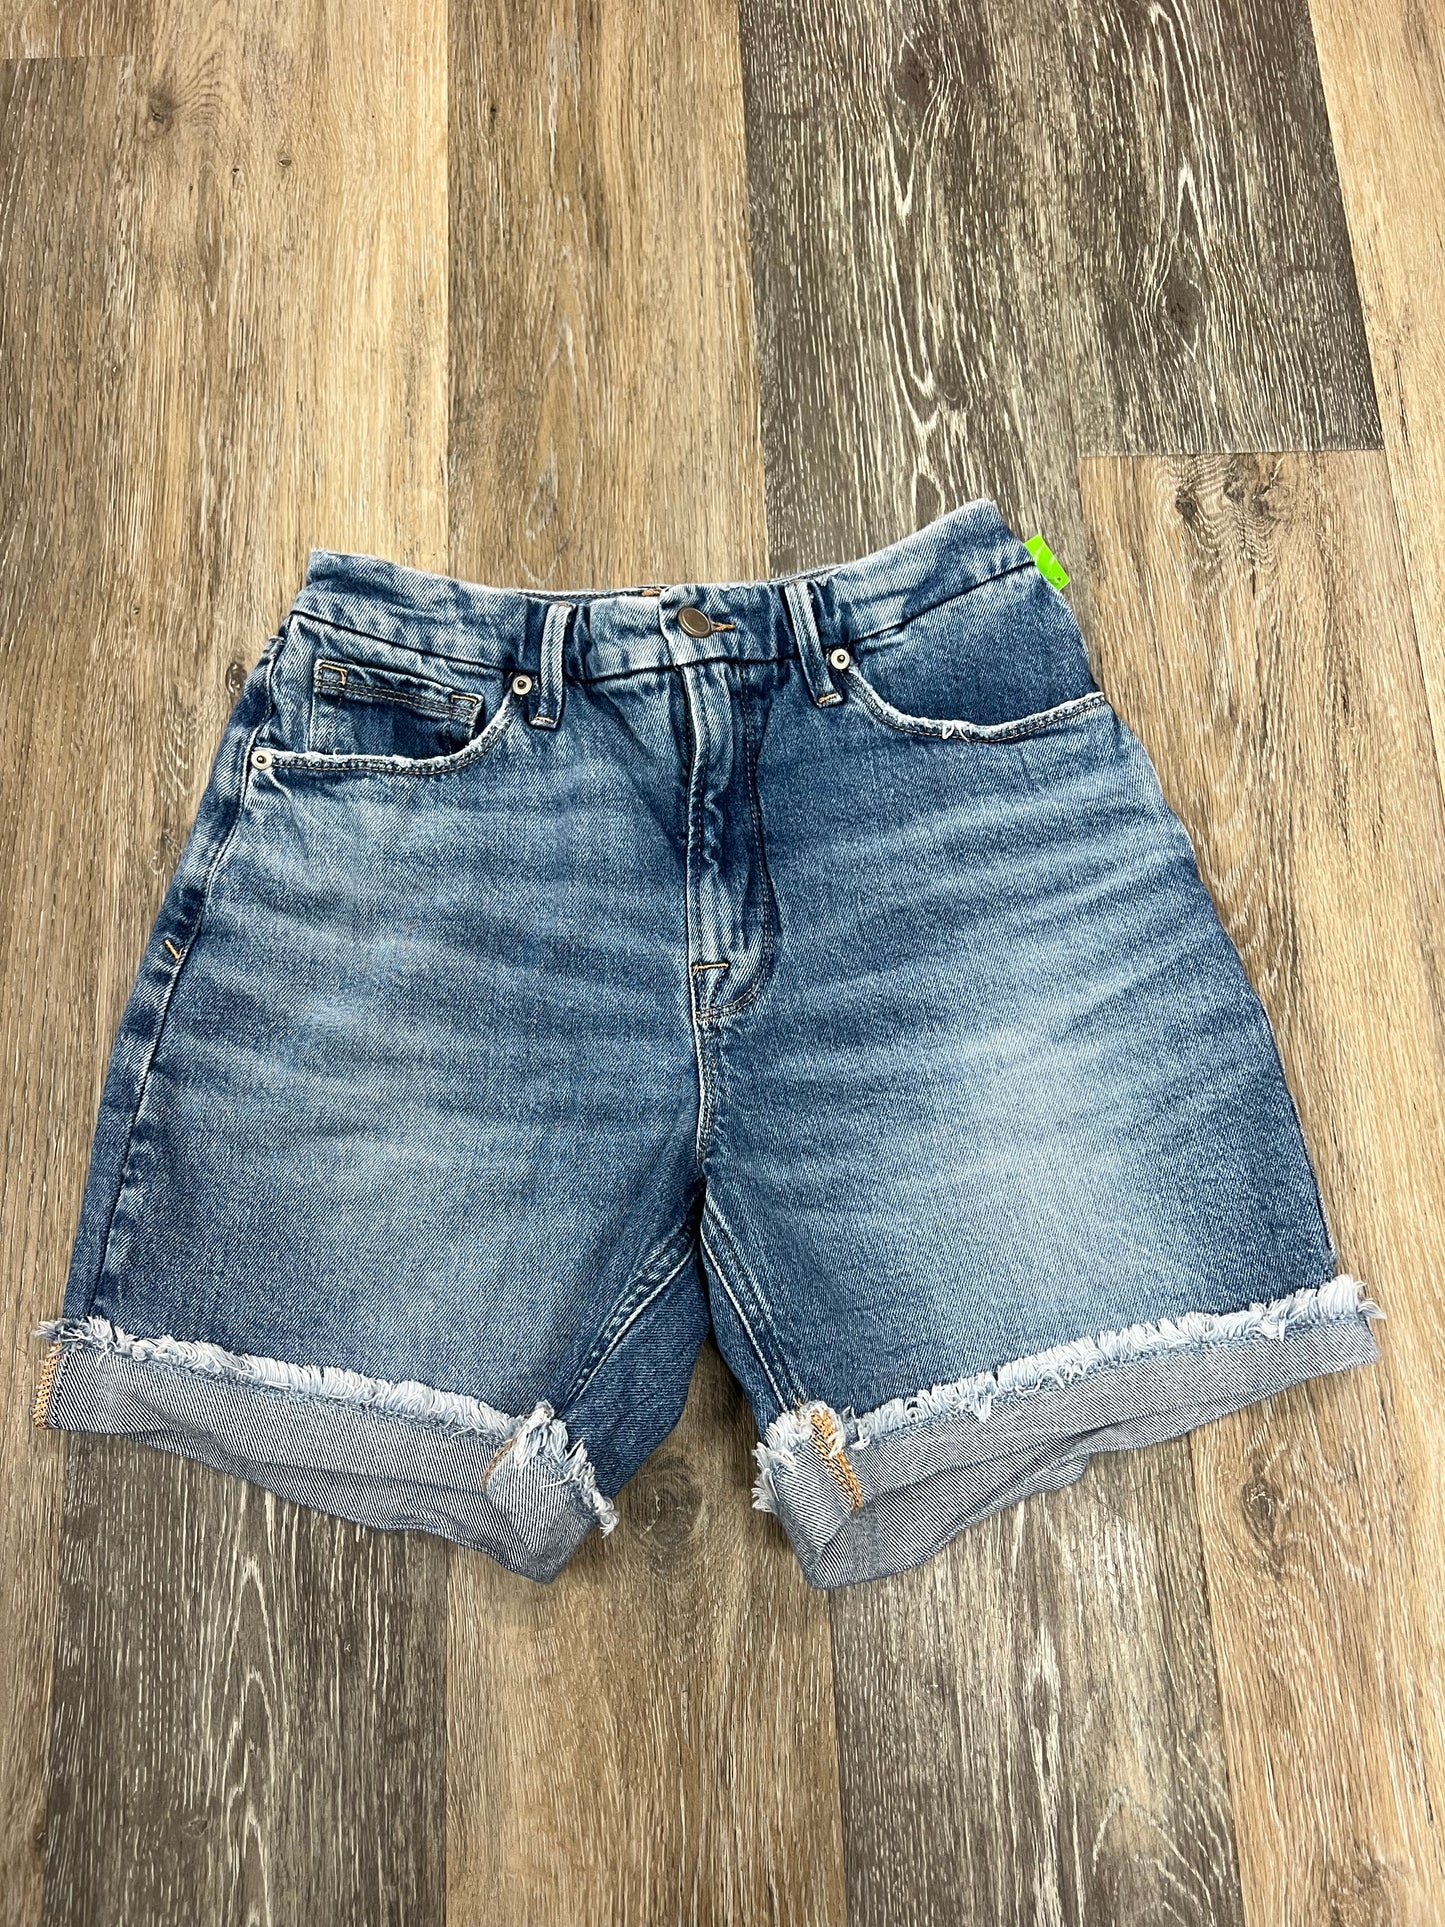 Shorts Designer By Good American  Size: 4/27